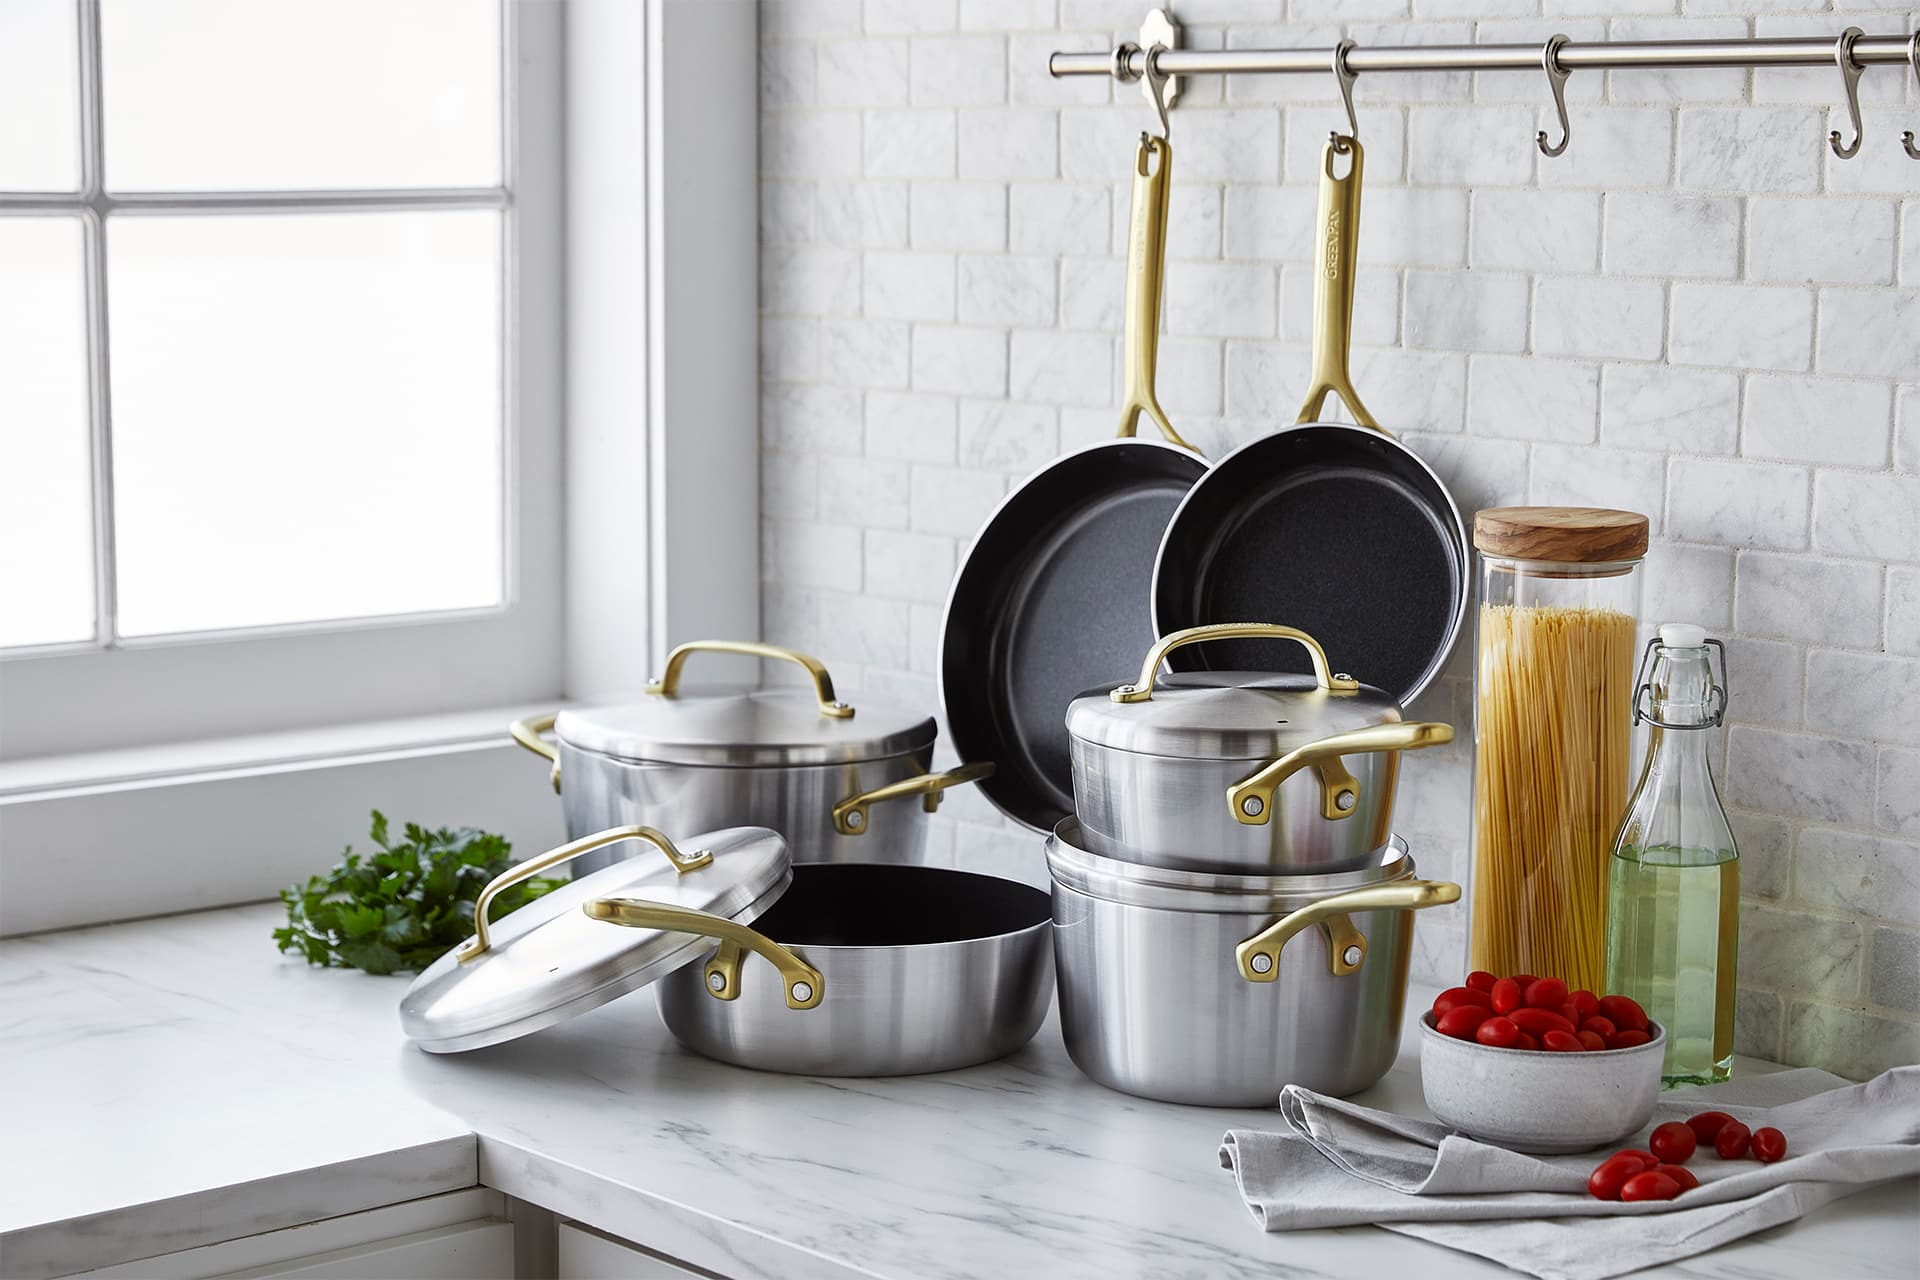 The Cookware Company Introducing New Ideas for Stovetop and Oven